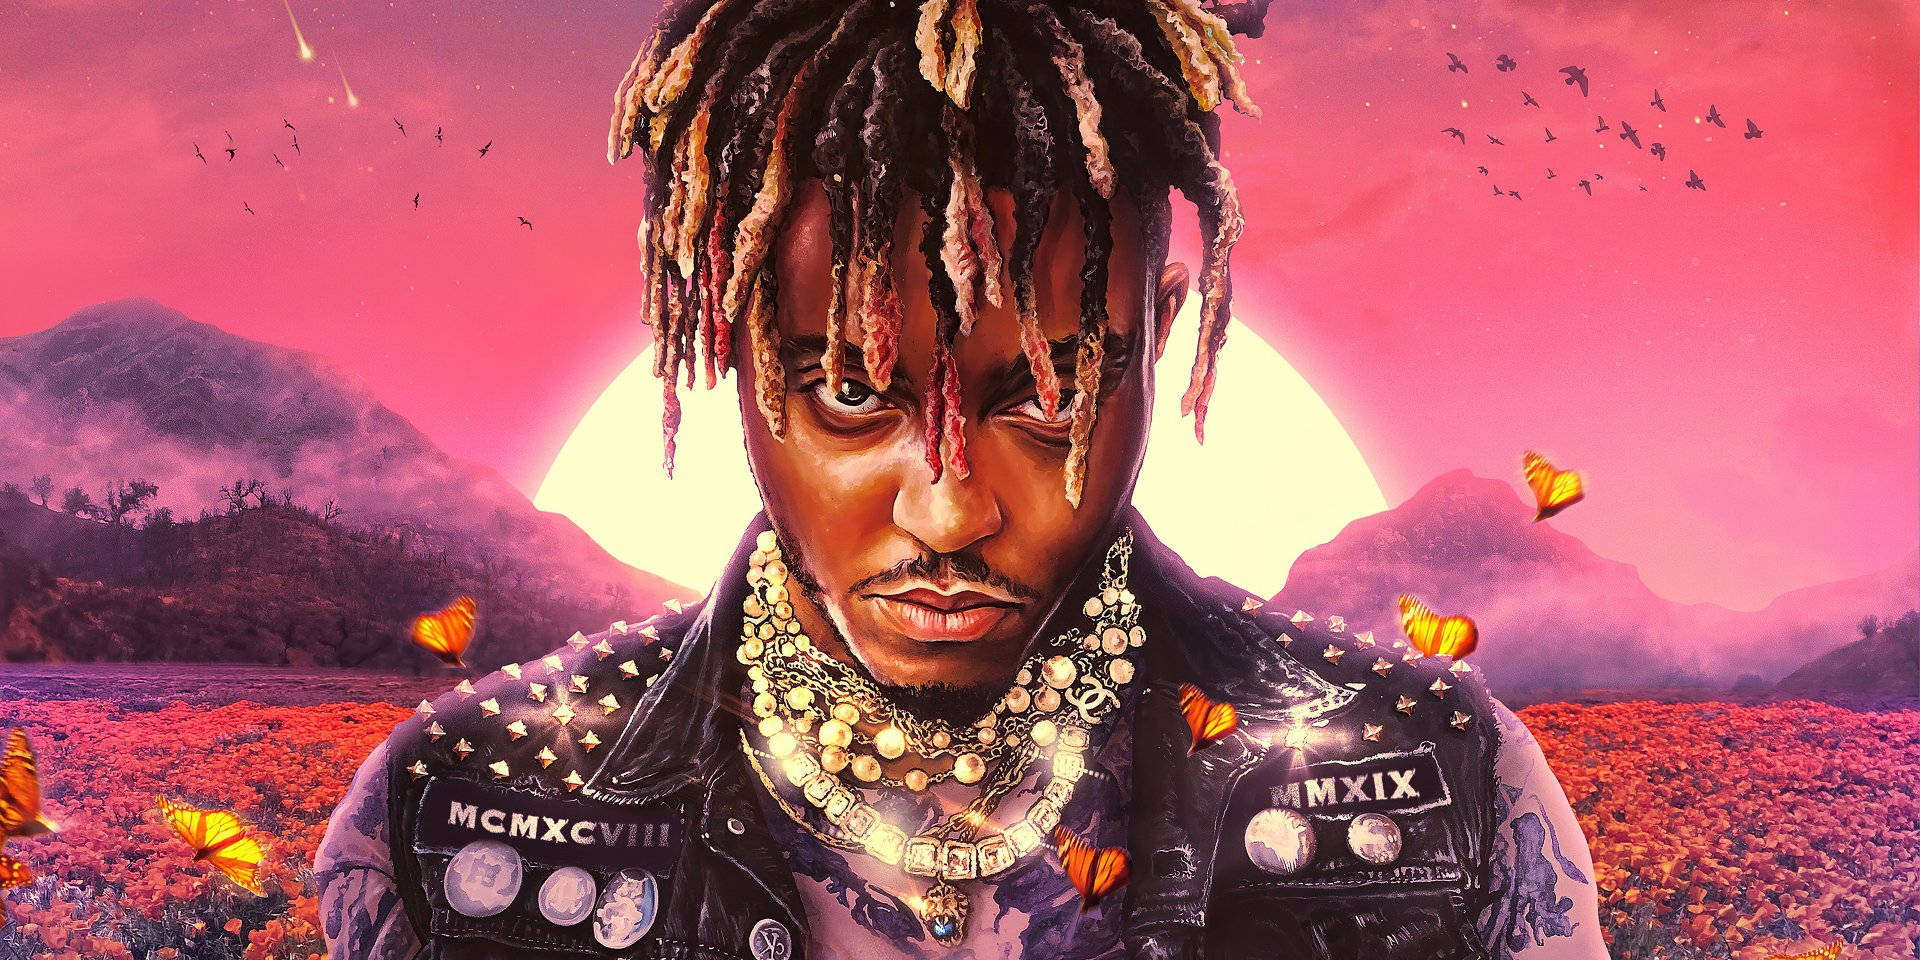 Rapper Juice Wrld performs on stage, wearing pink. Wallpaper